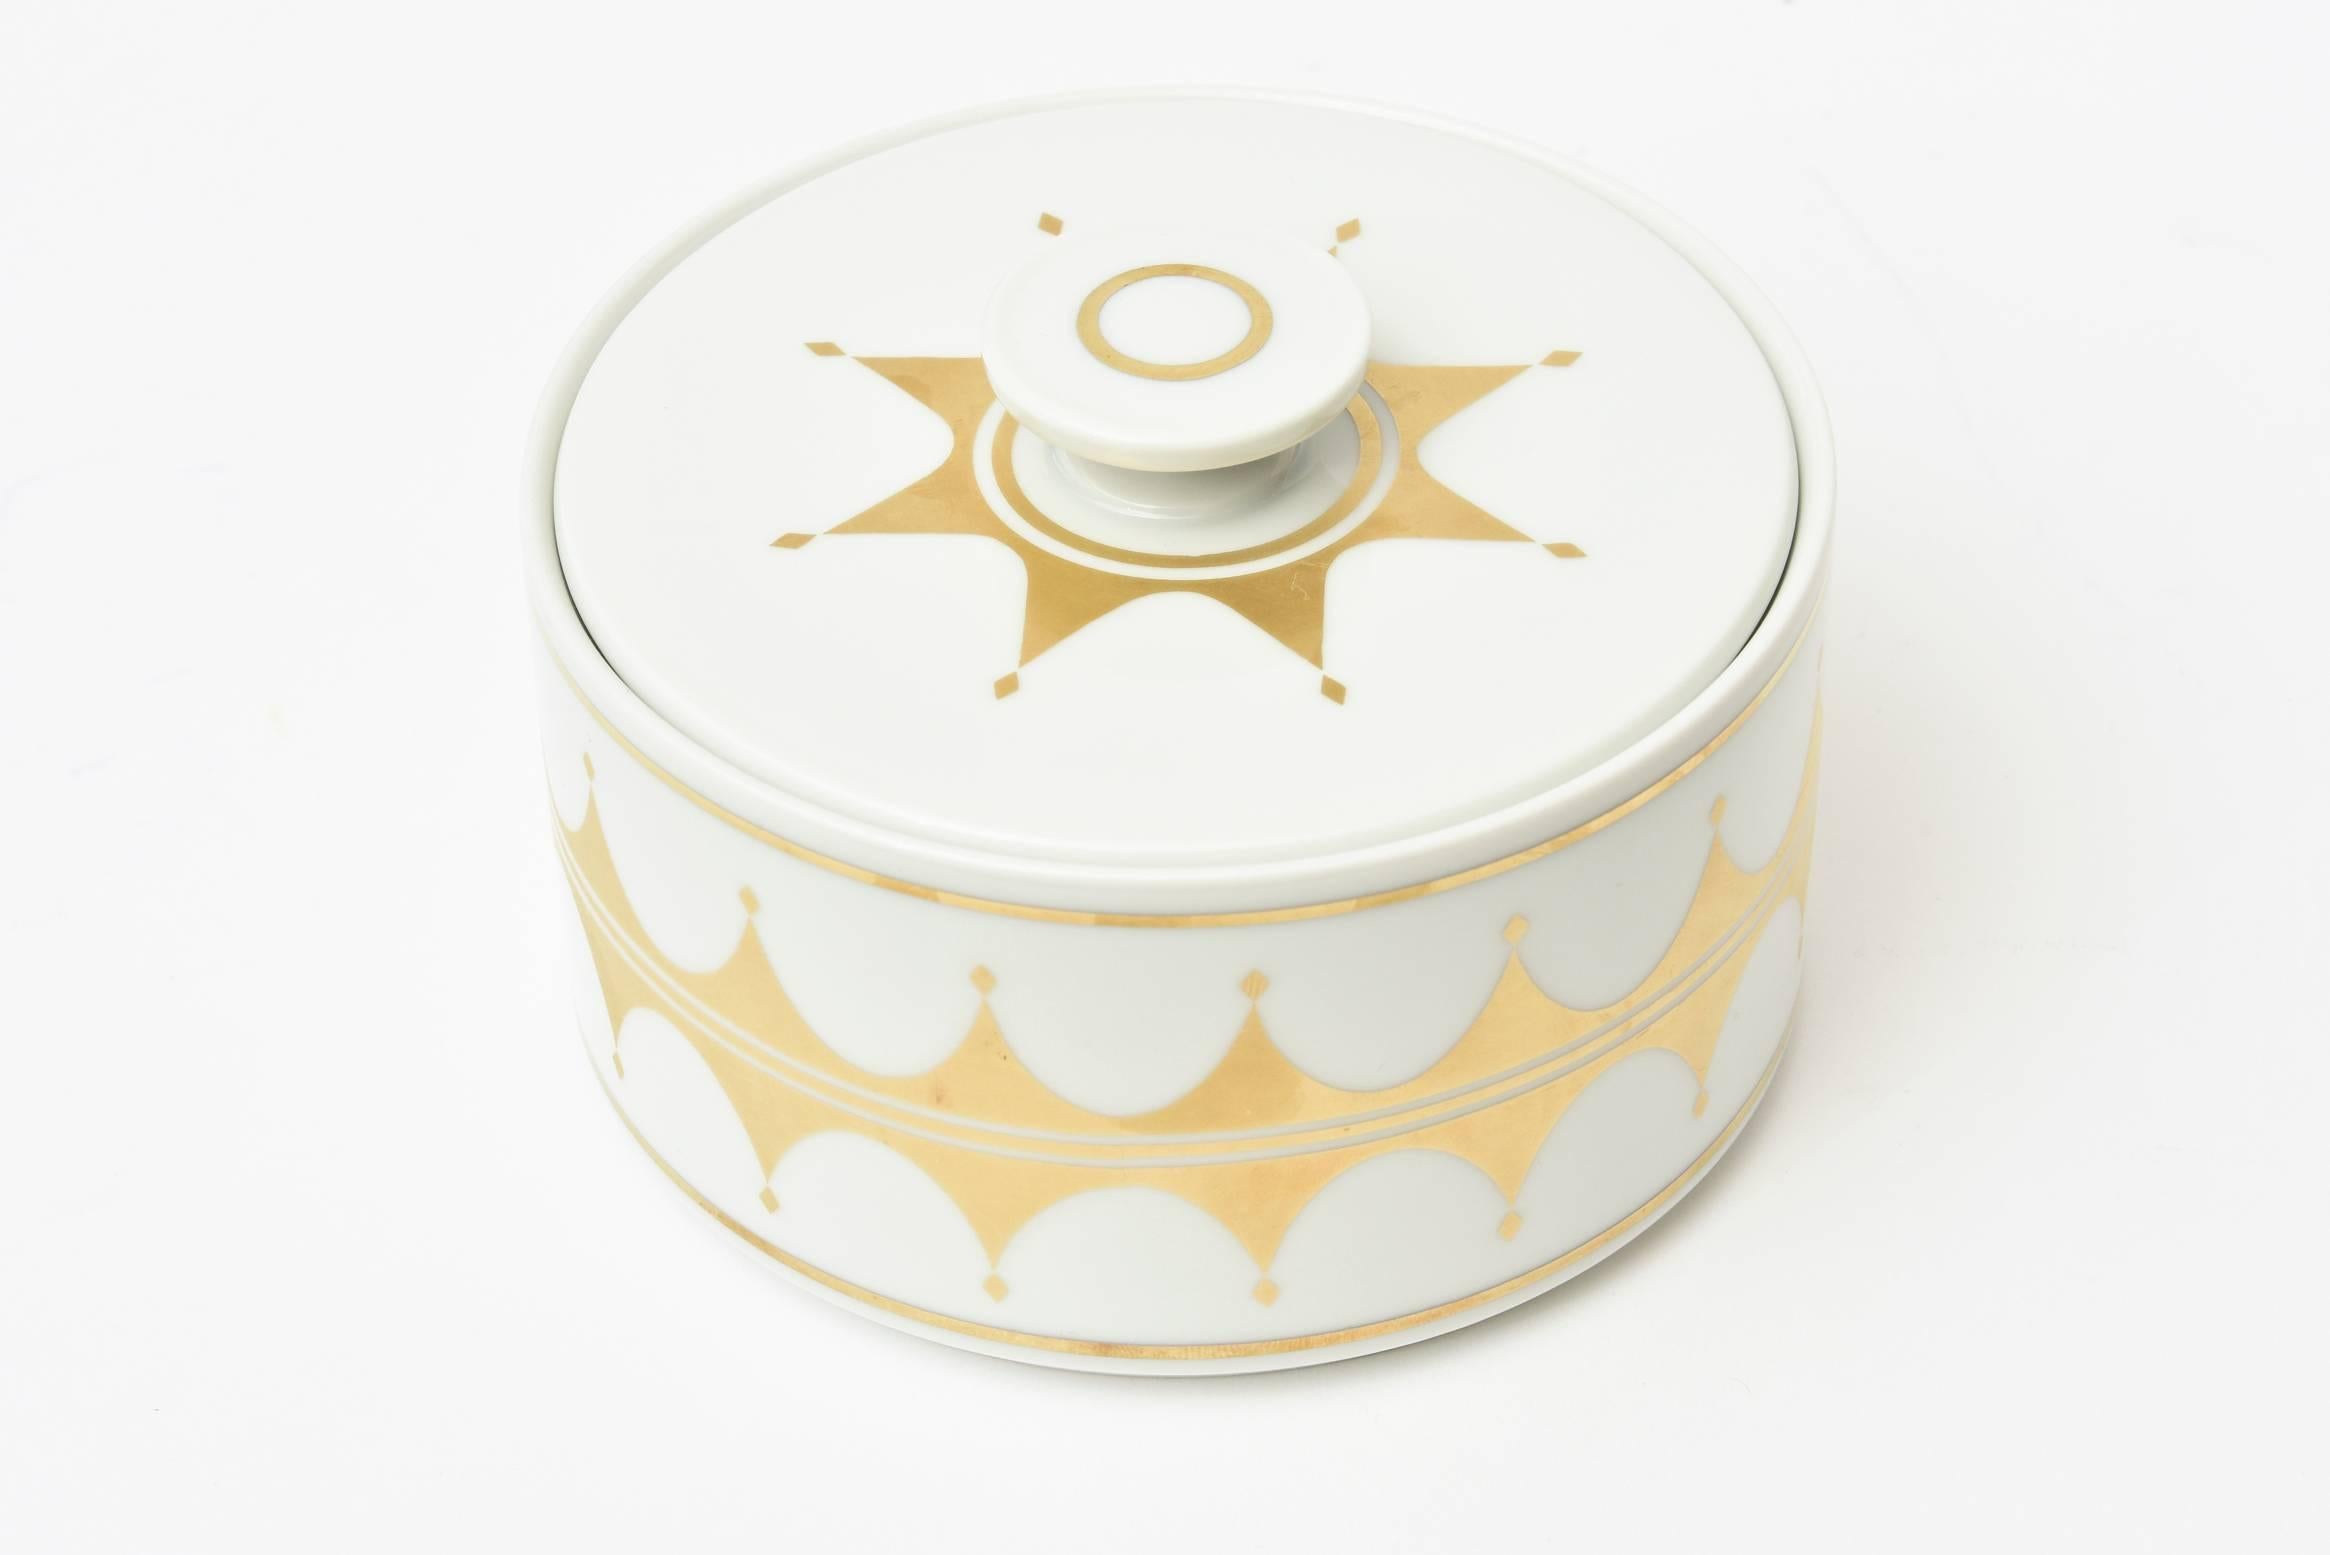 German Modernist Geometric Porcelain Two-Part Box with 24-Carat Gold